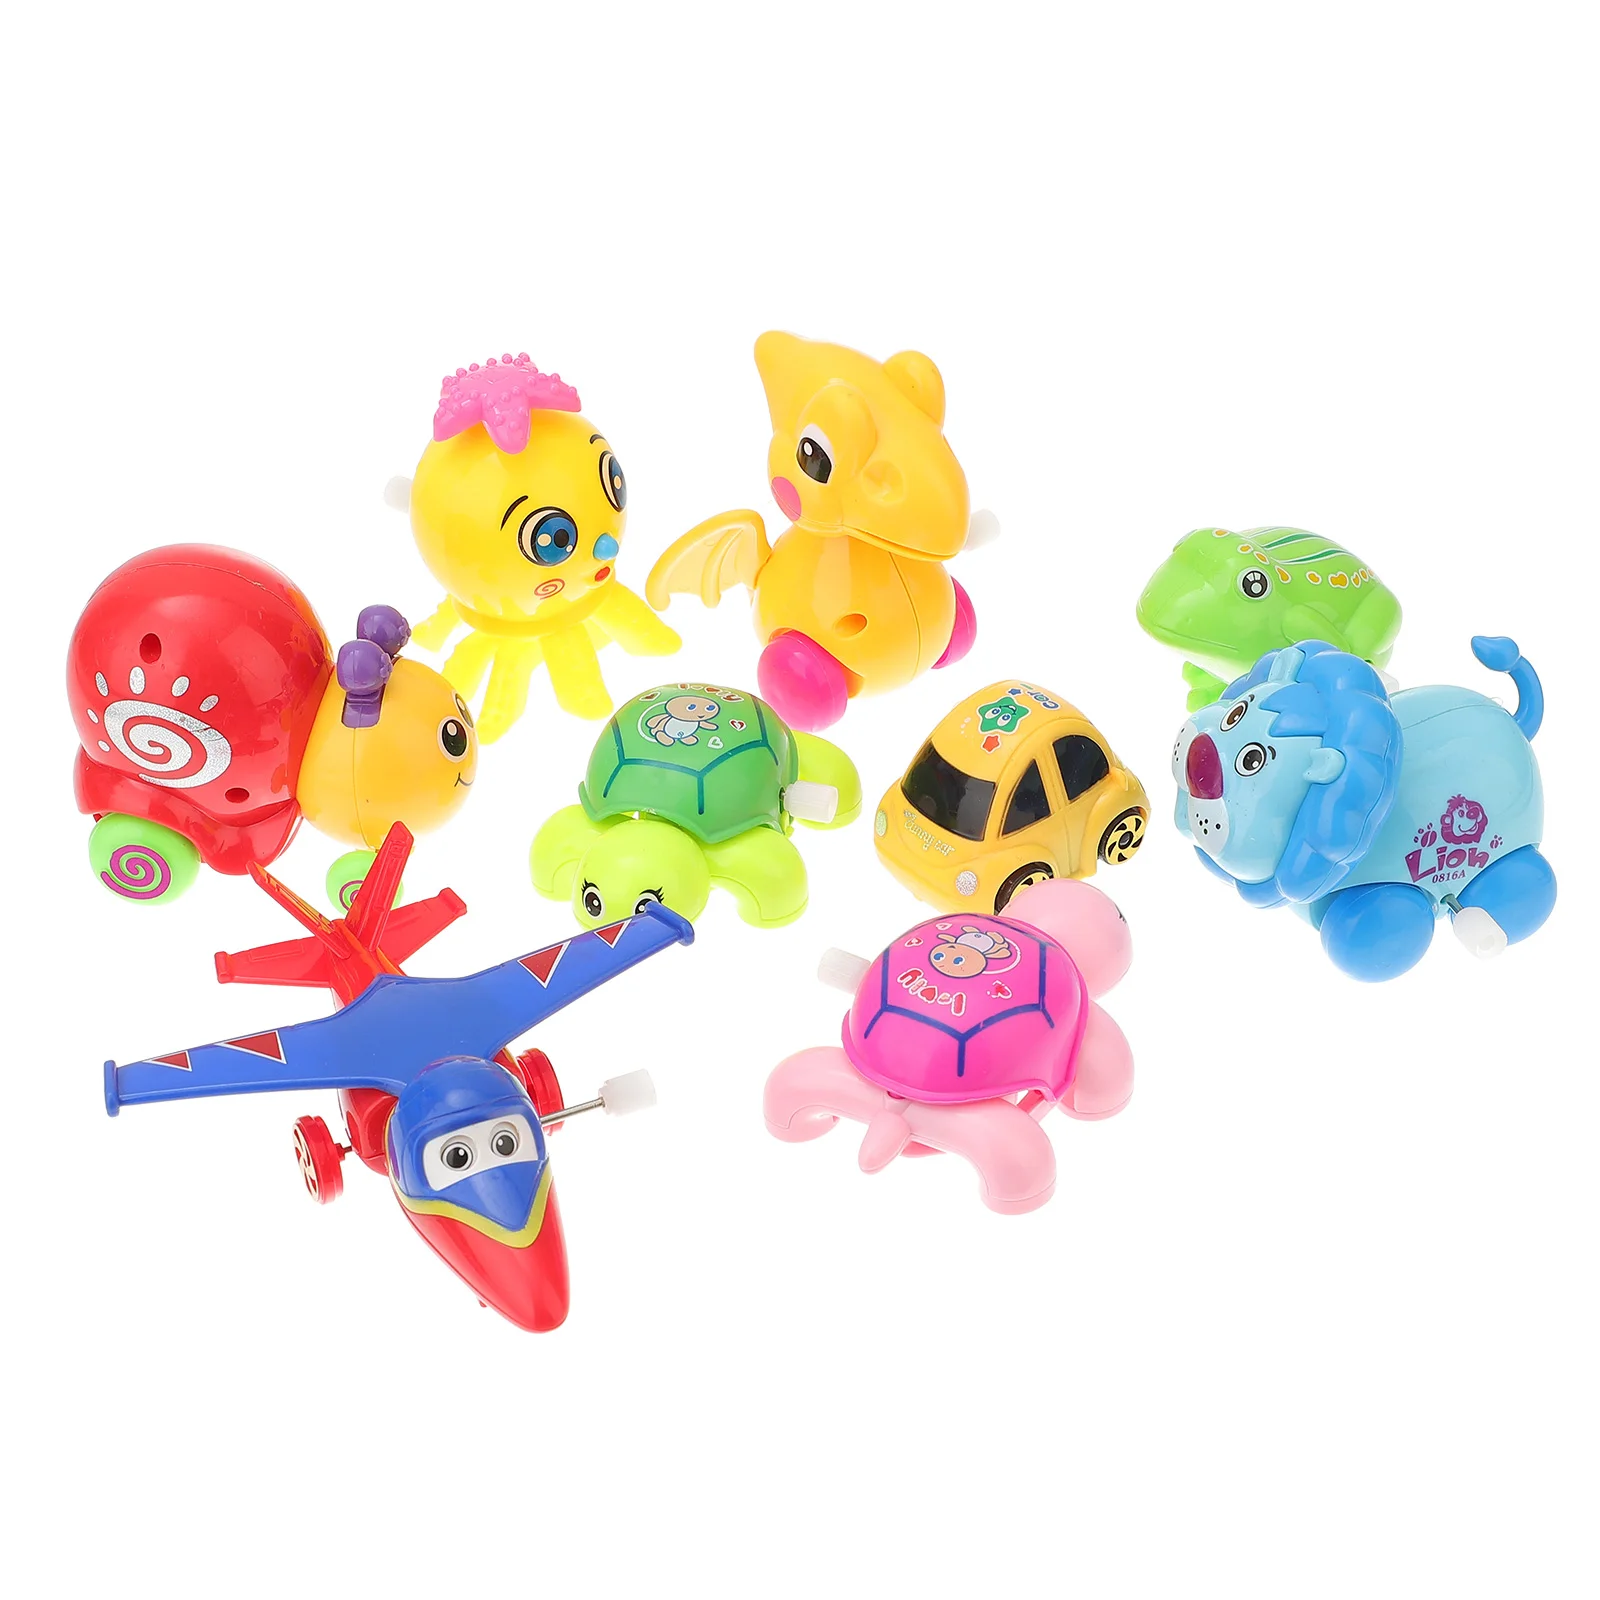 

9pcs Kids Clockwork Animal Wind Up Toys Funny Cartoon Educational Animal Toys Party Favors Toy Great Gift (Random Color and